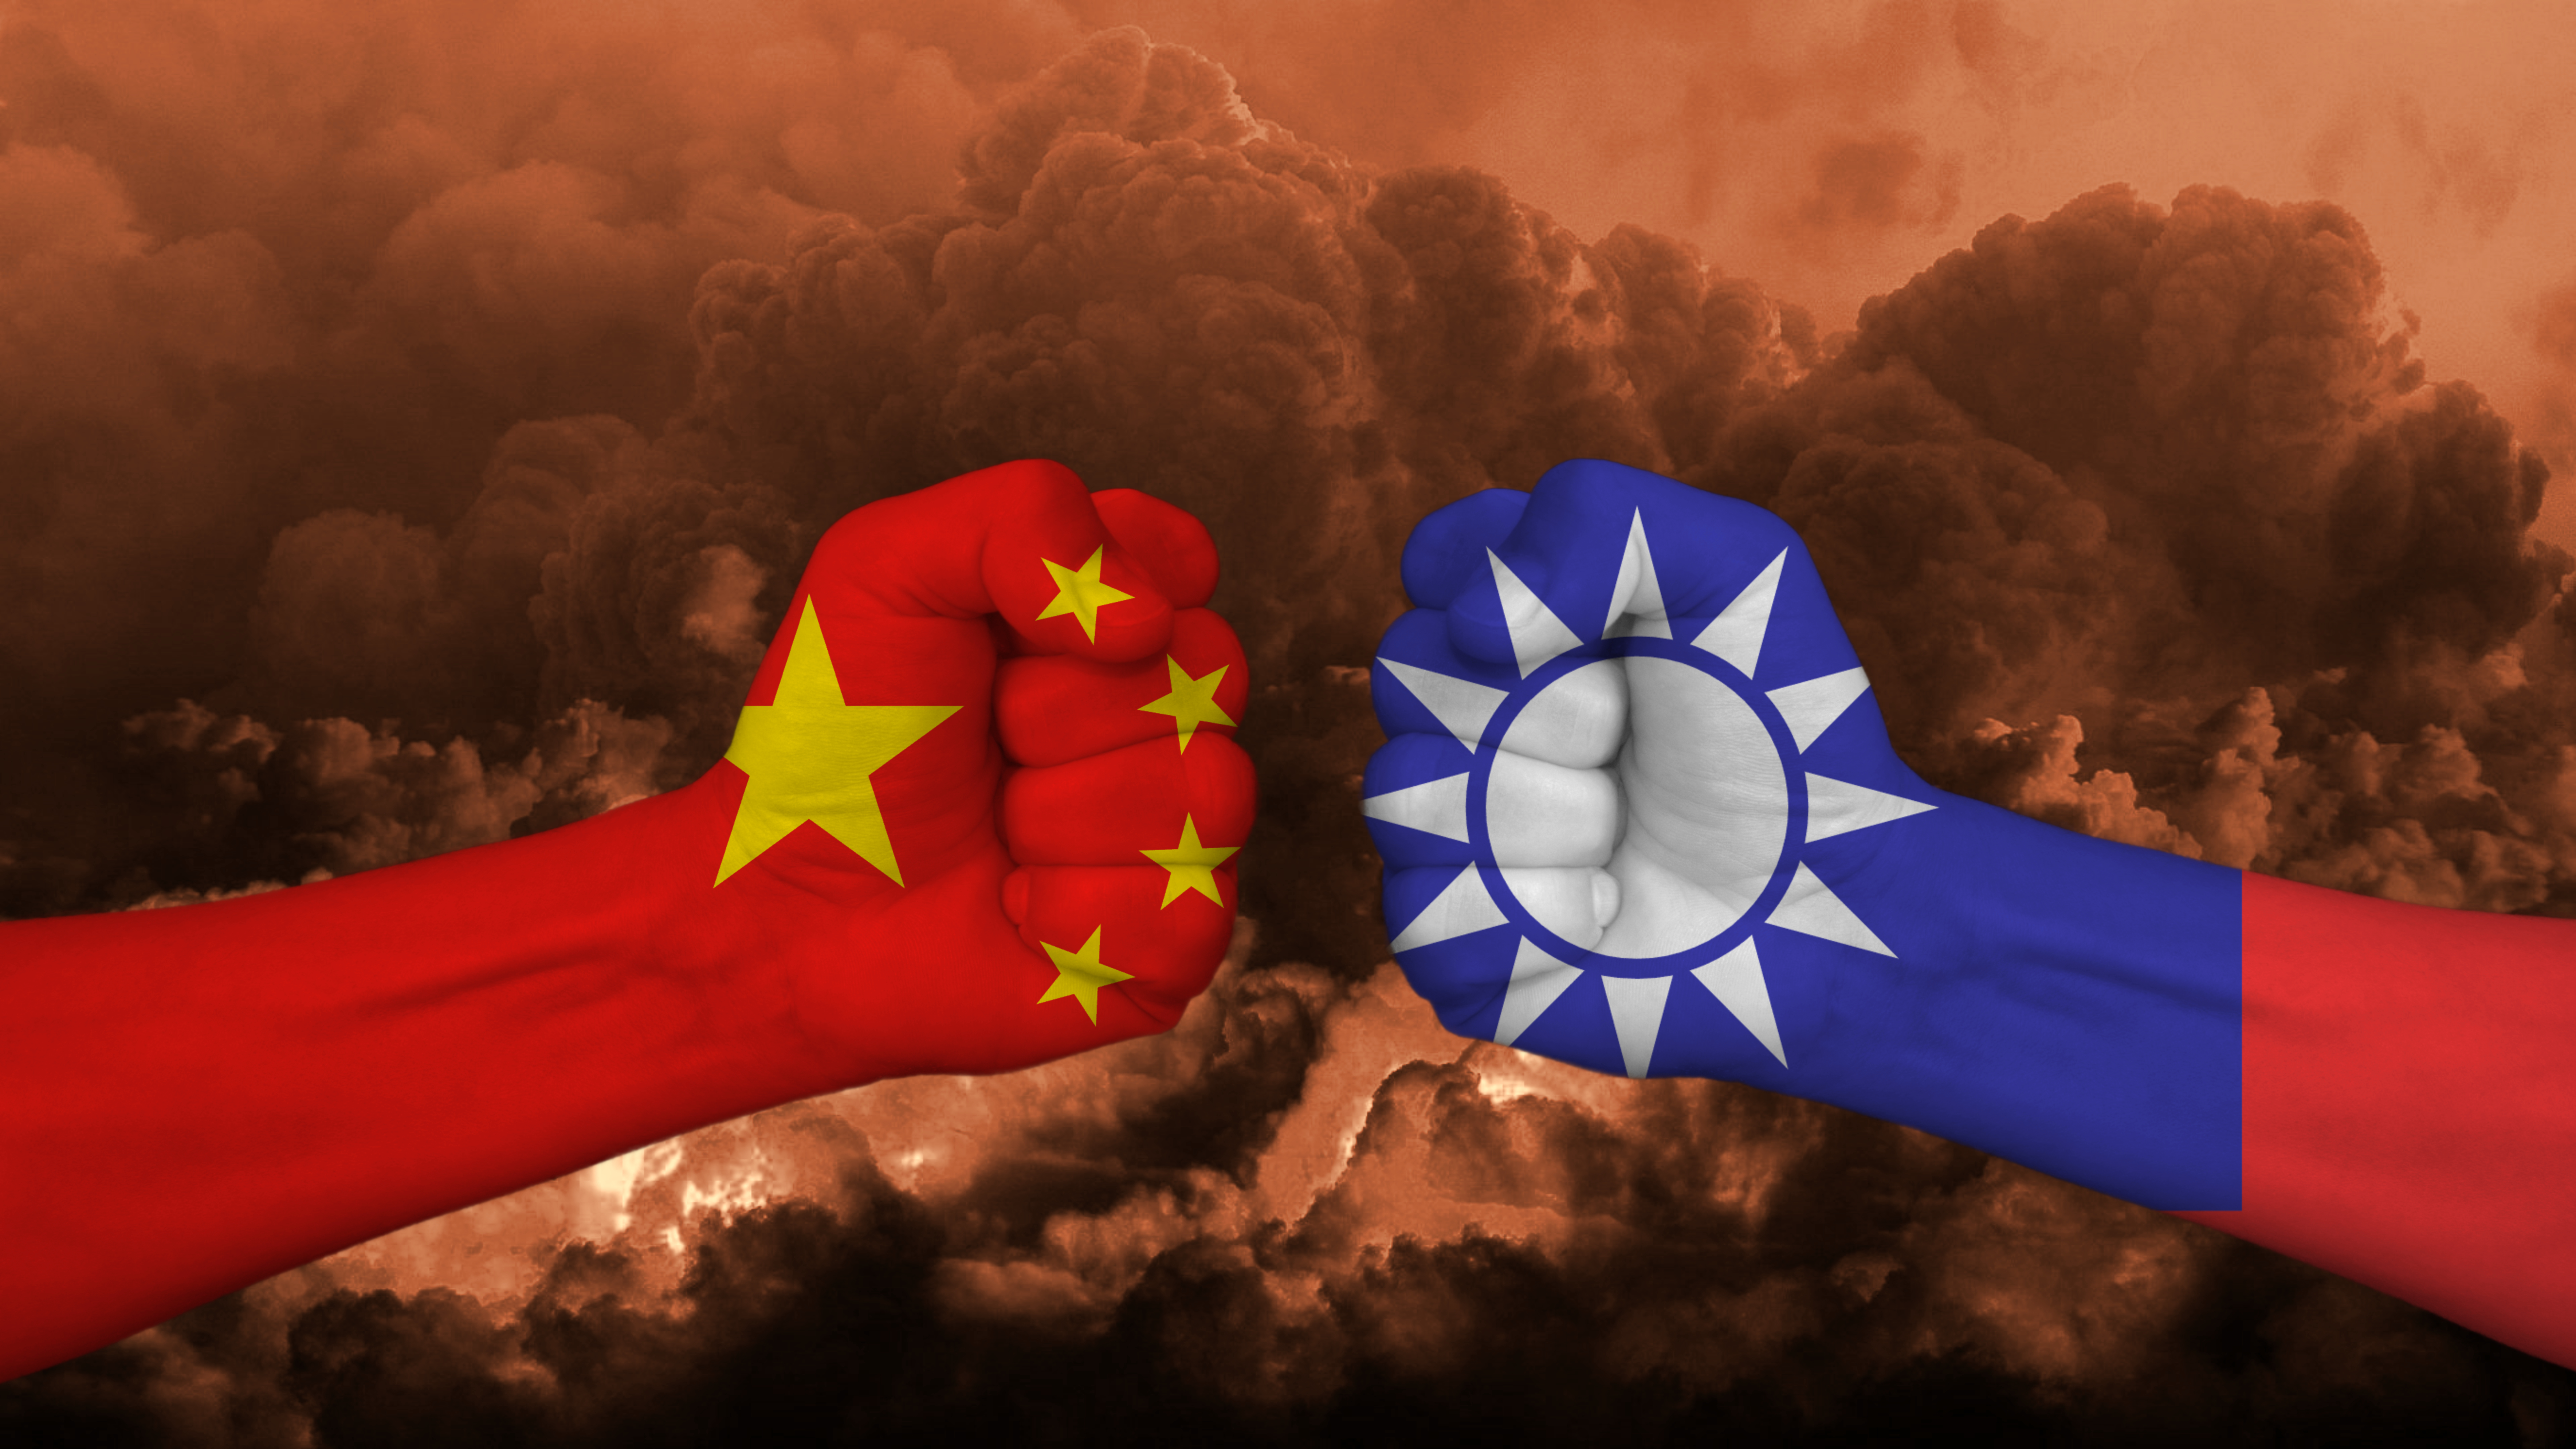 china vs versus taiwan. world political cold war concept. china opens hostilities with taiwan